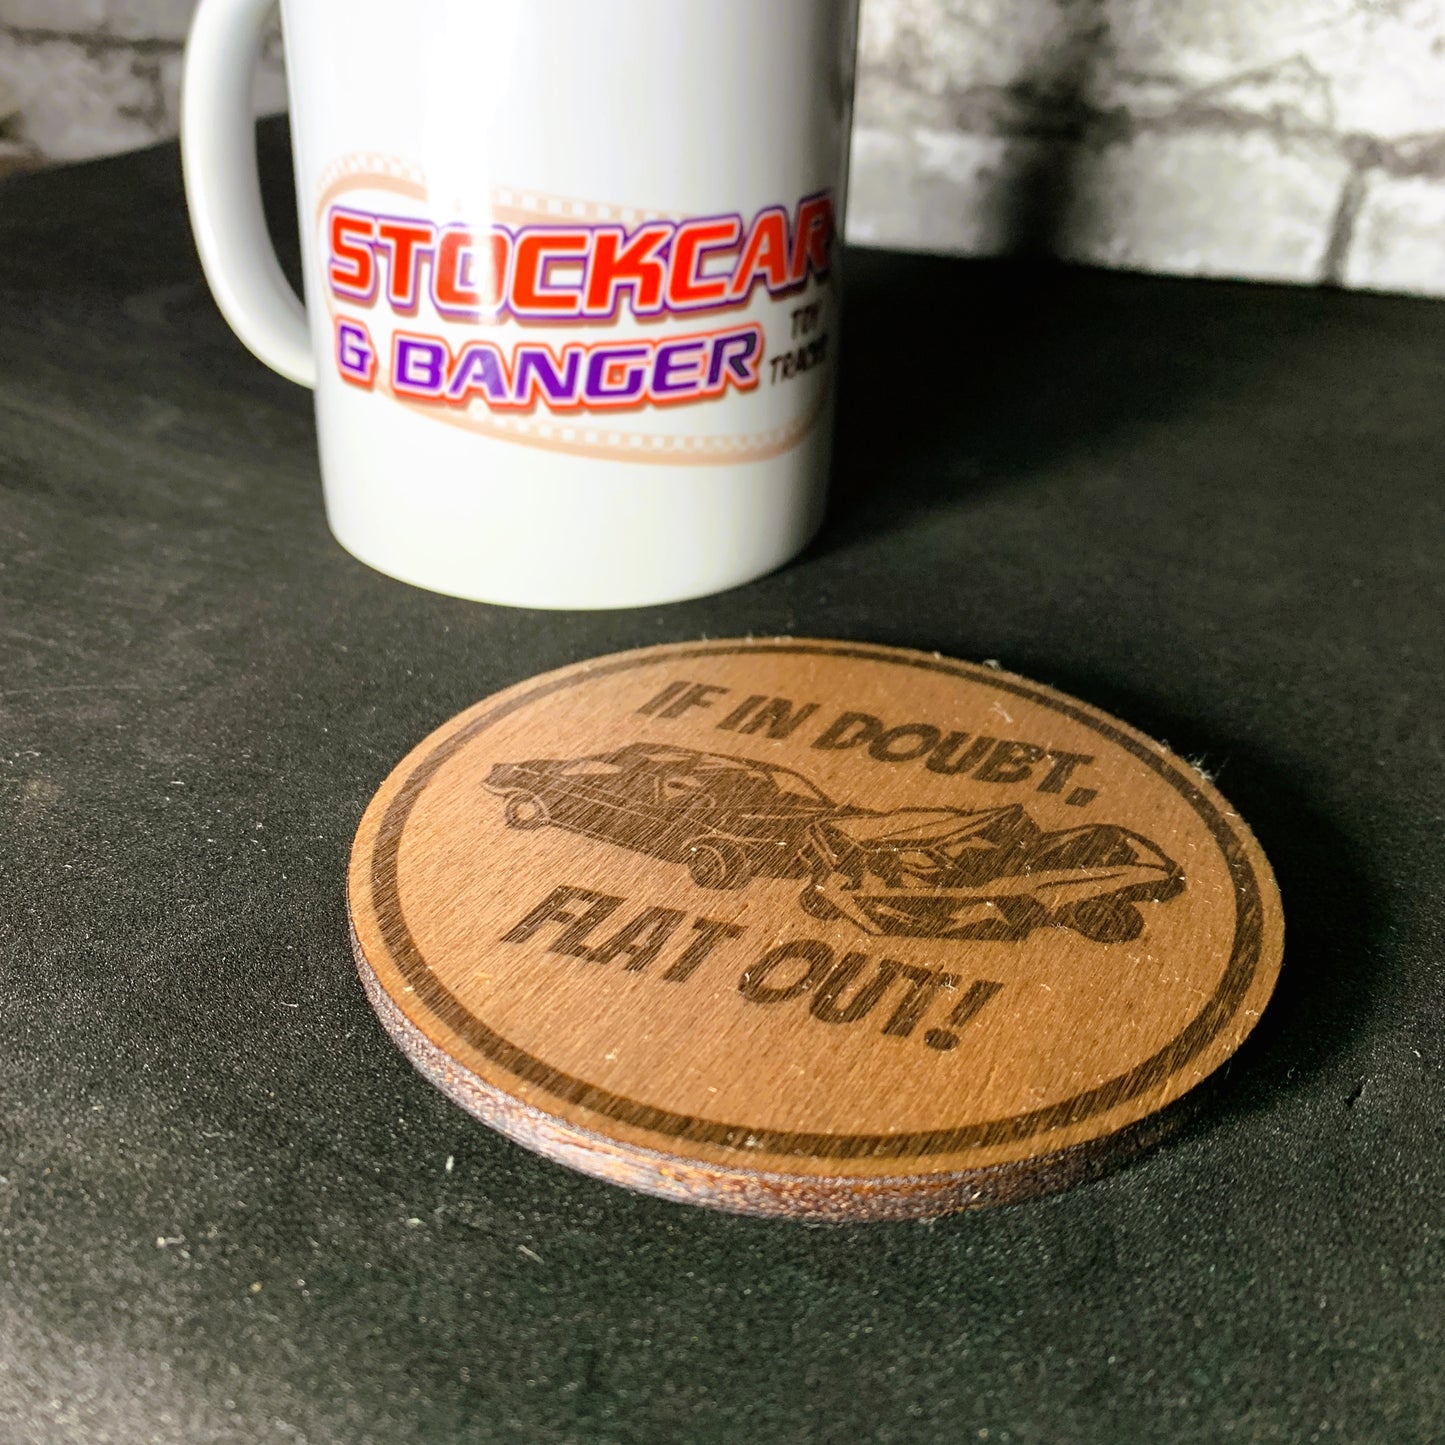 If in doubt, Flat Out! - Wooden Coaster - Coasters - Stock Car & Banger Toy Tracks